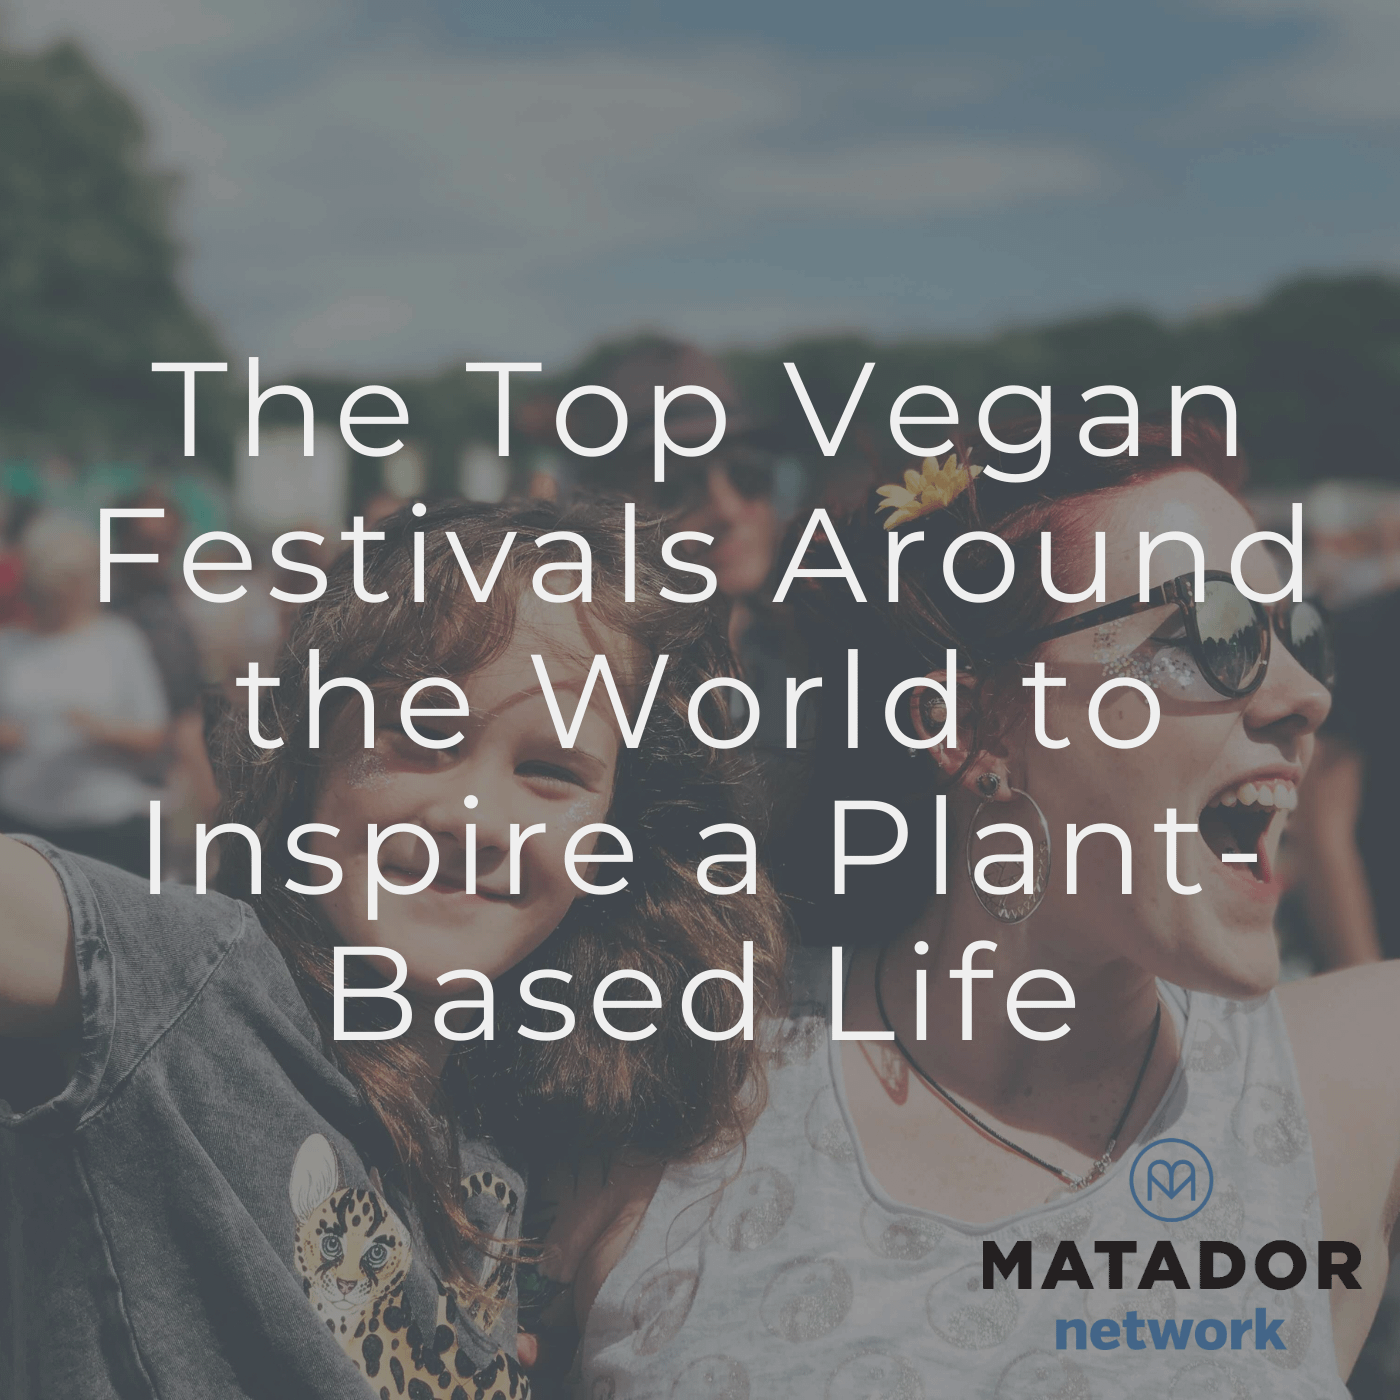 The Top Vegan Festivals Around the World to Inspire a Plant-Based Life